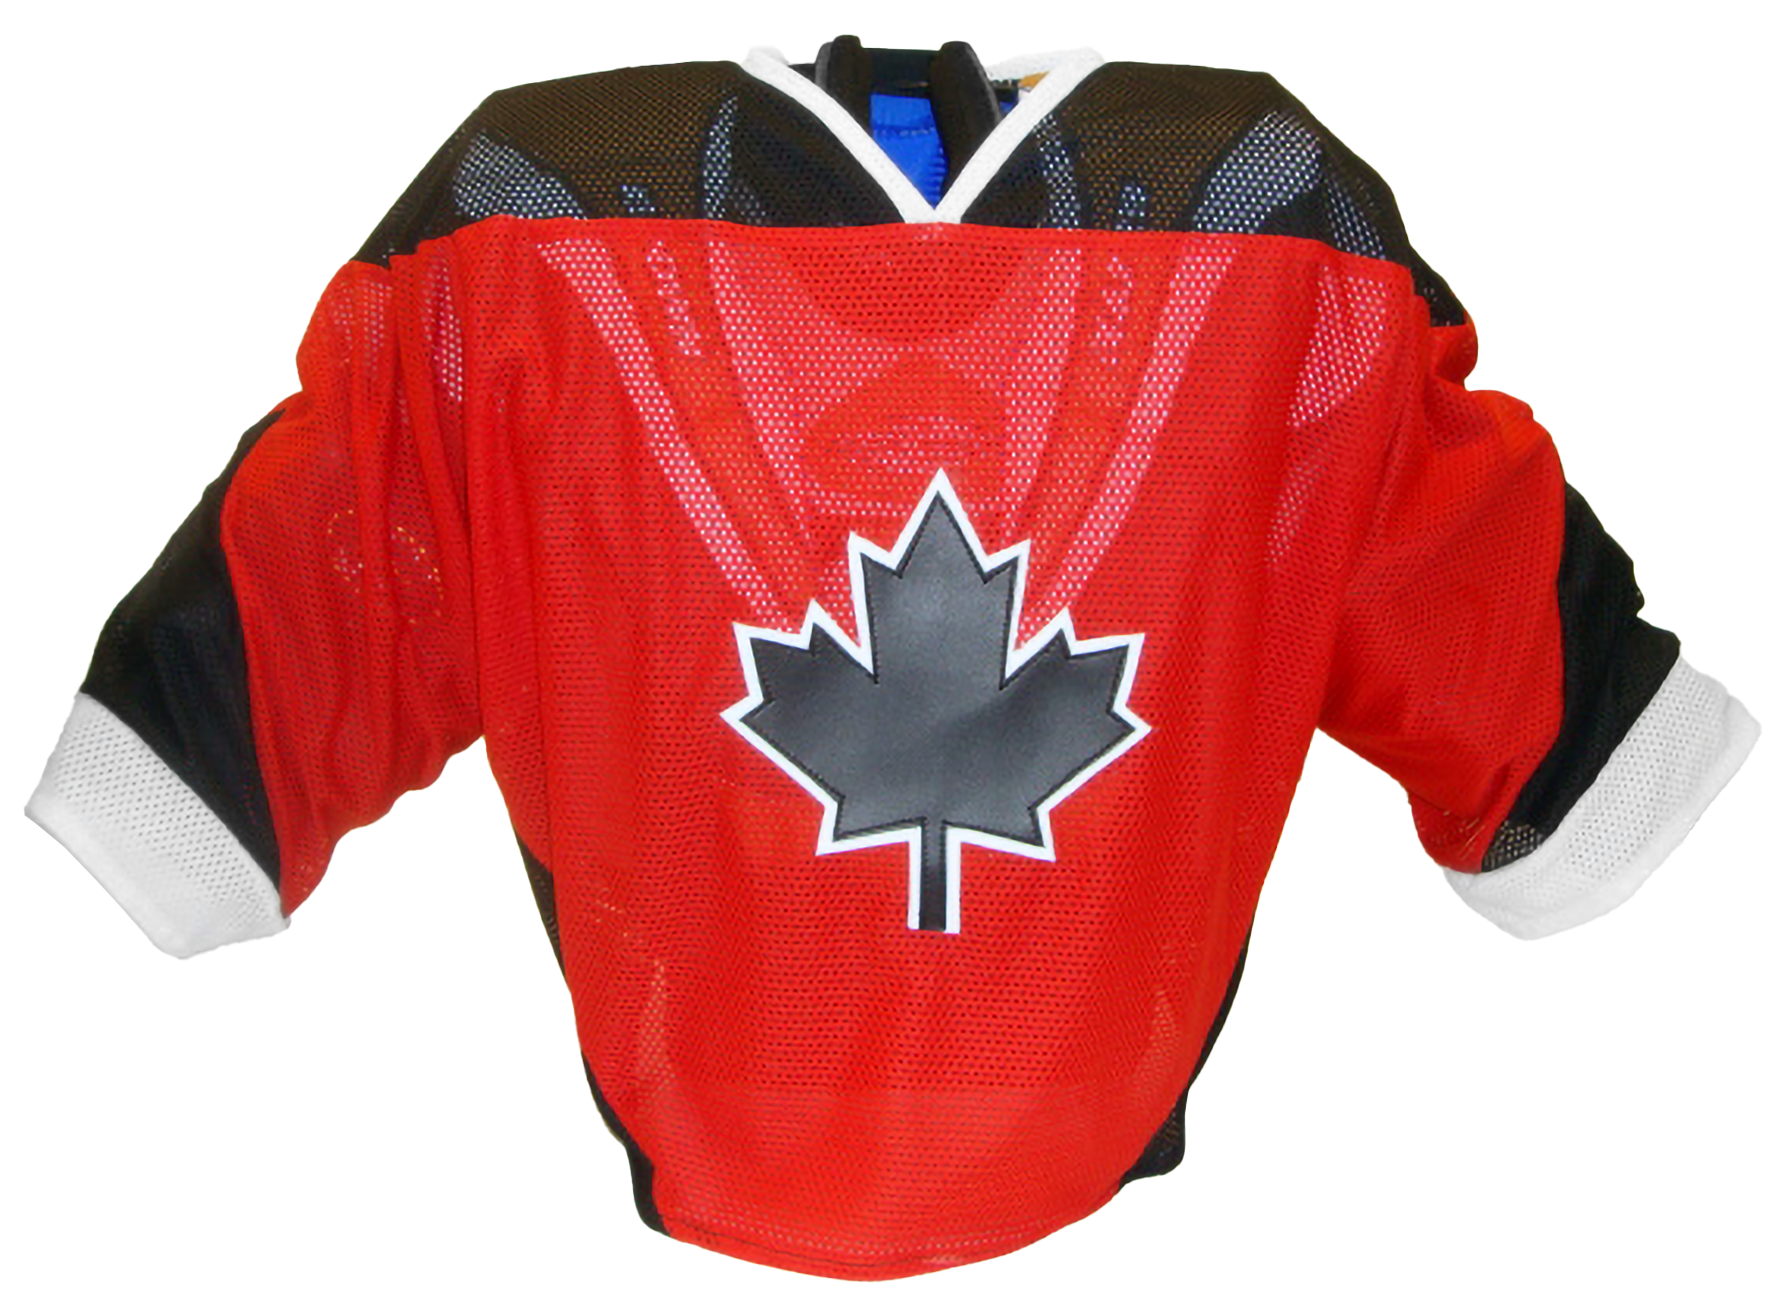 Red and black jersey with a large maple leaf